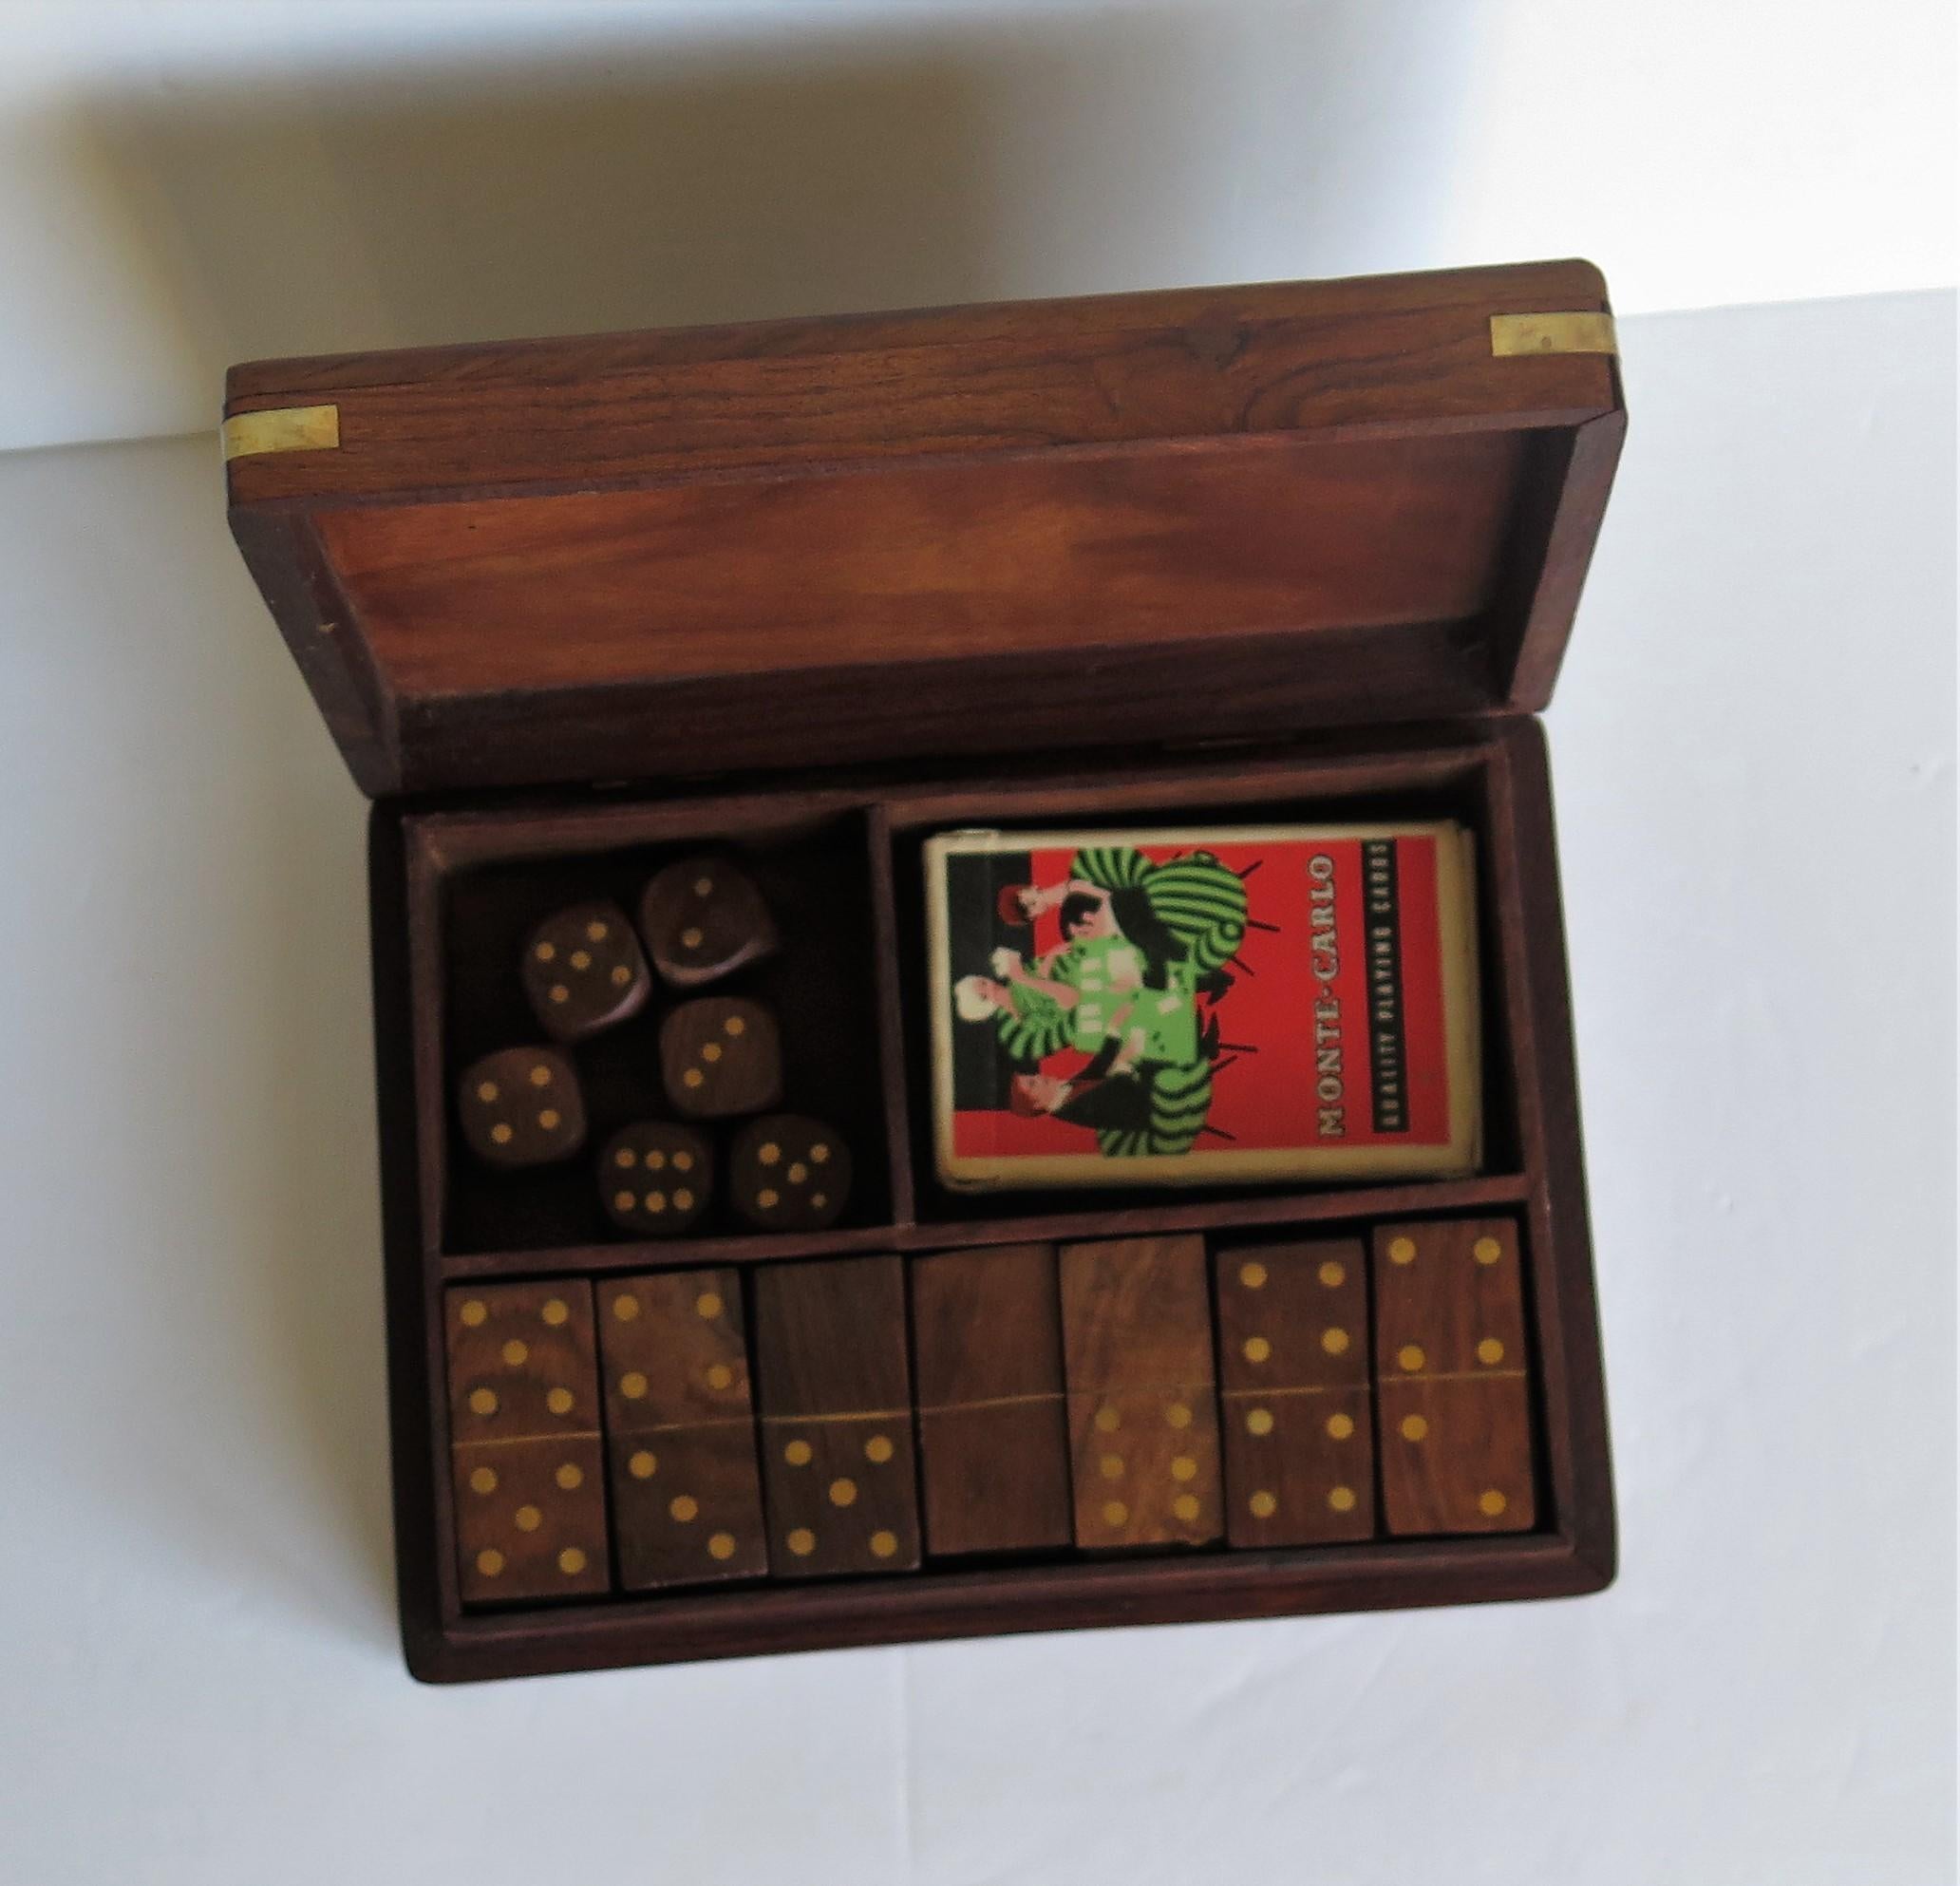 This is a very good handmade Inlaid, lidded games box or compendium, complete with a 6-spot Dominoe set, 6 dice and a set of playing cards, which we date to the mid-20th century, circa 1940s.

This is a lovely handmade Treen like games box set or